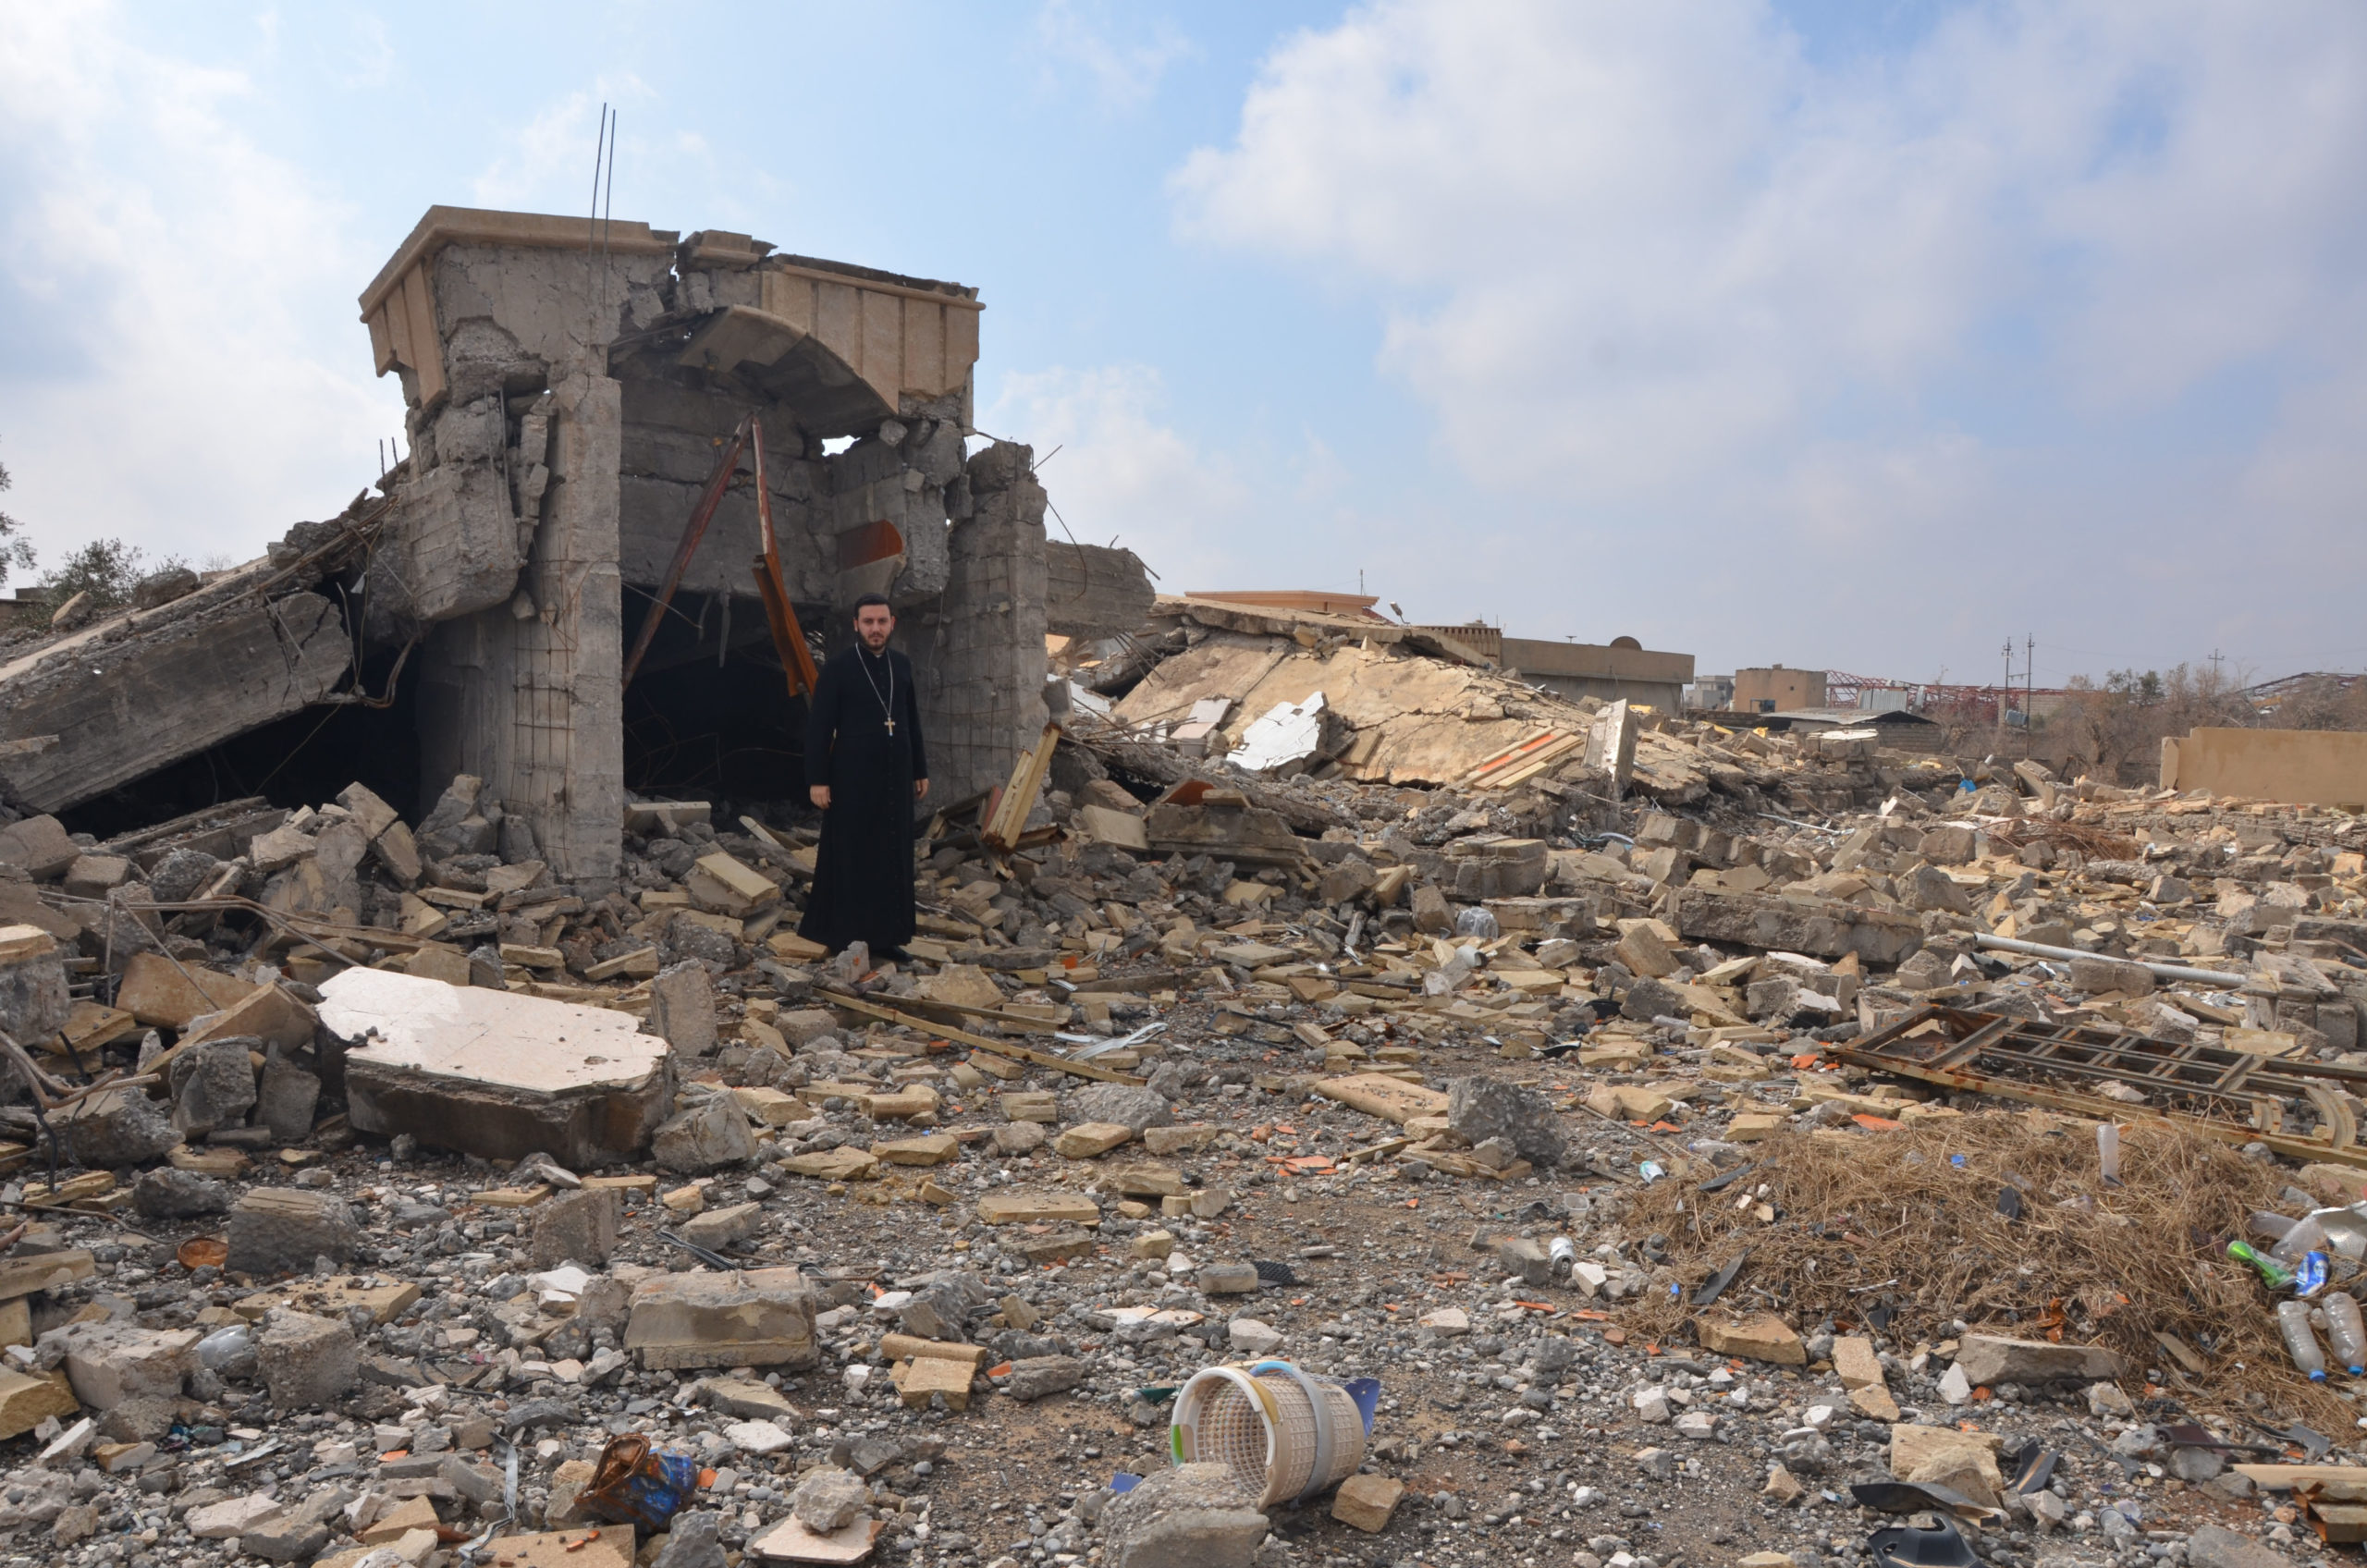 With image of a priest standing amid the ruins of a building in Bashiqa destroyed during Daesh (ISIS)’s occupation of the town (Image © Aid to the Church in Need)